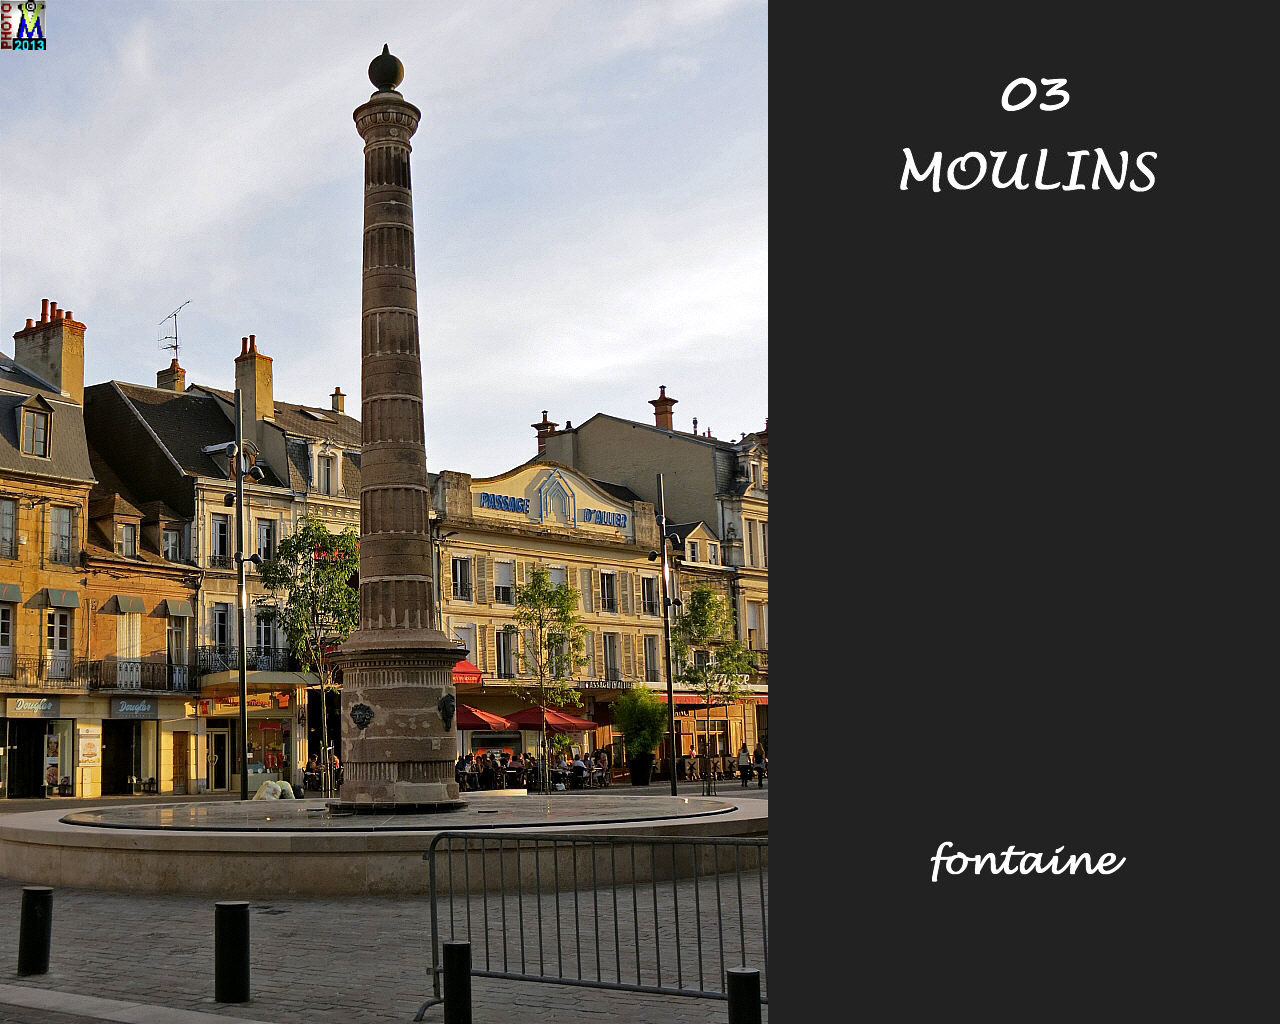 03MOULINS_fontaine_100.jpg